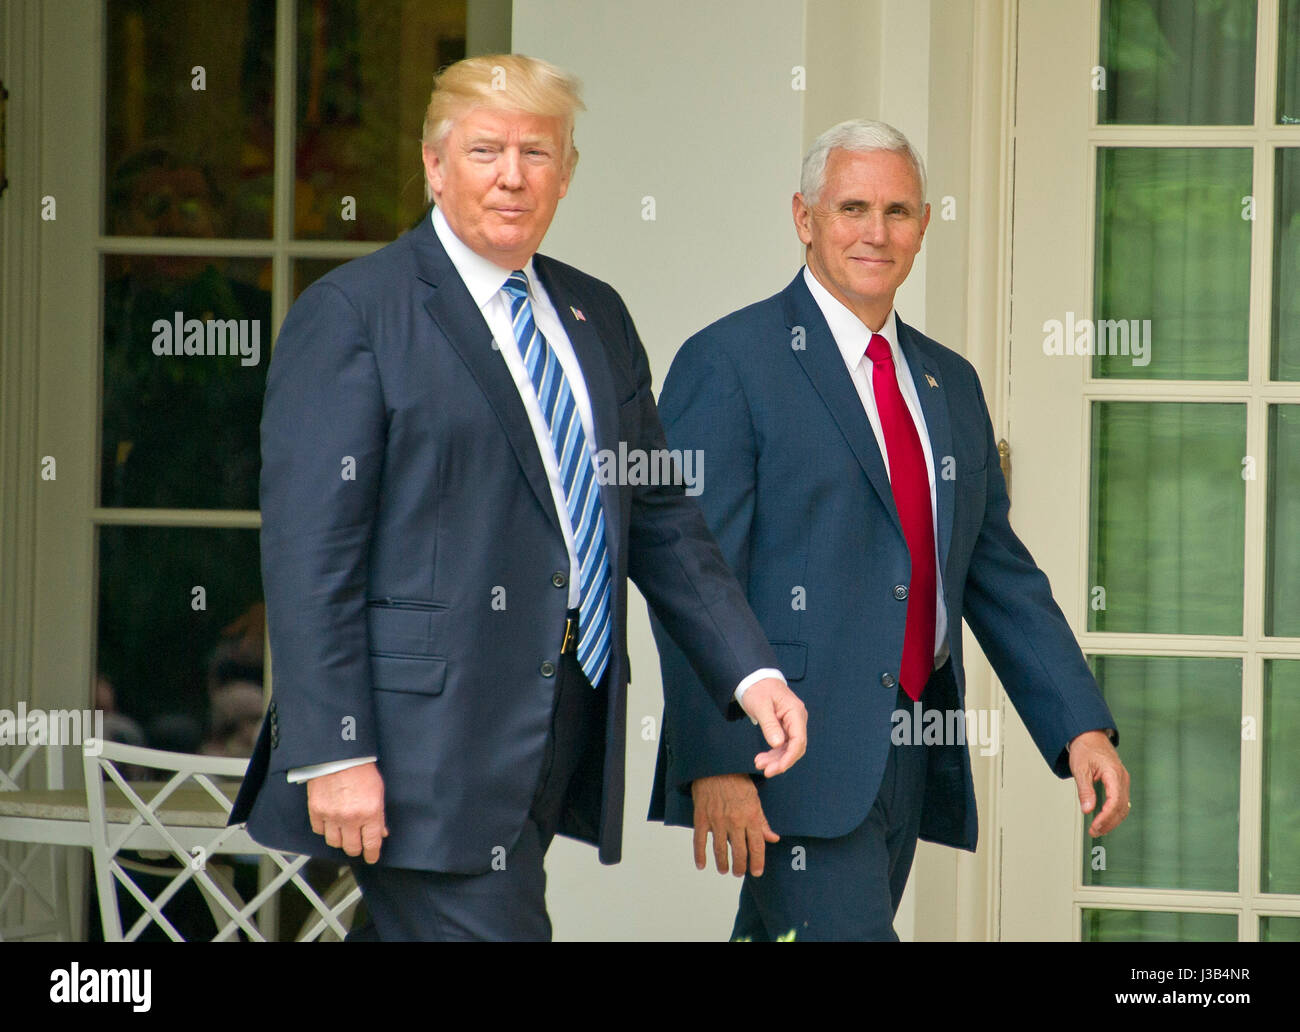 United States President Donald J. Trump and US Vice President Mike Pence arrive for a ceremony where the President will sign a Proclamation designating May 4, 2017 as a National Day of Prayer and an Executive Order 'Promoting Free Speech and Religious Liberty' in the Rose Garden of the White House in Washington, DC on Thursday, May 4, 2017. Credit: Ron Sachs / CNP - NO WIRE SERVICE- Photo: Ron Sachs/Consolidated/dpa Stock Photo